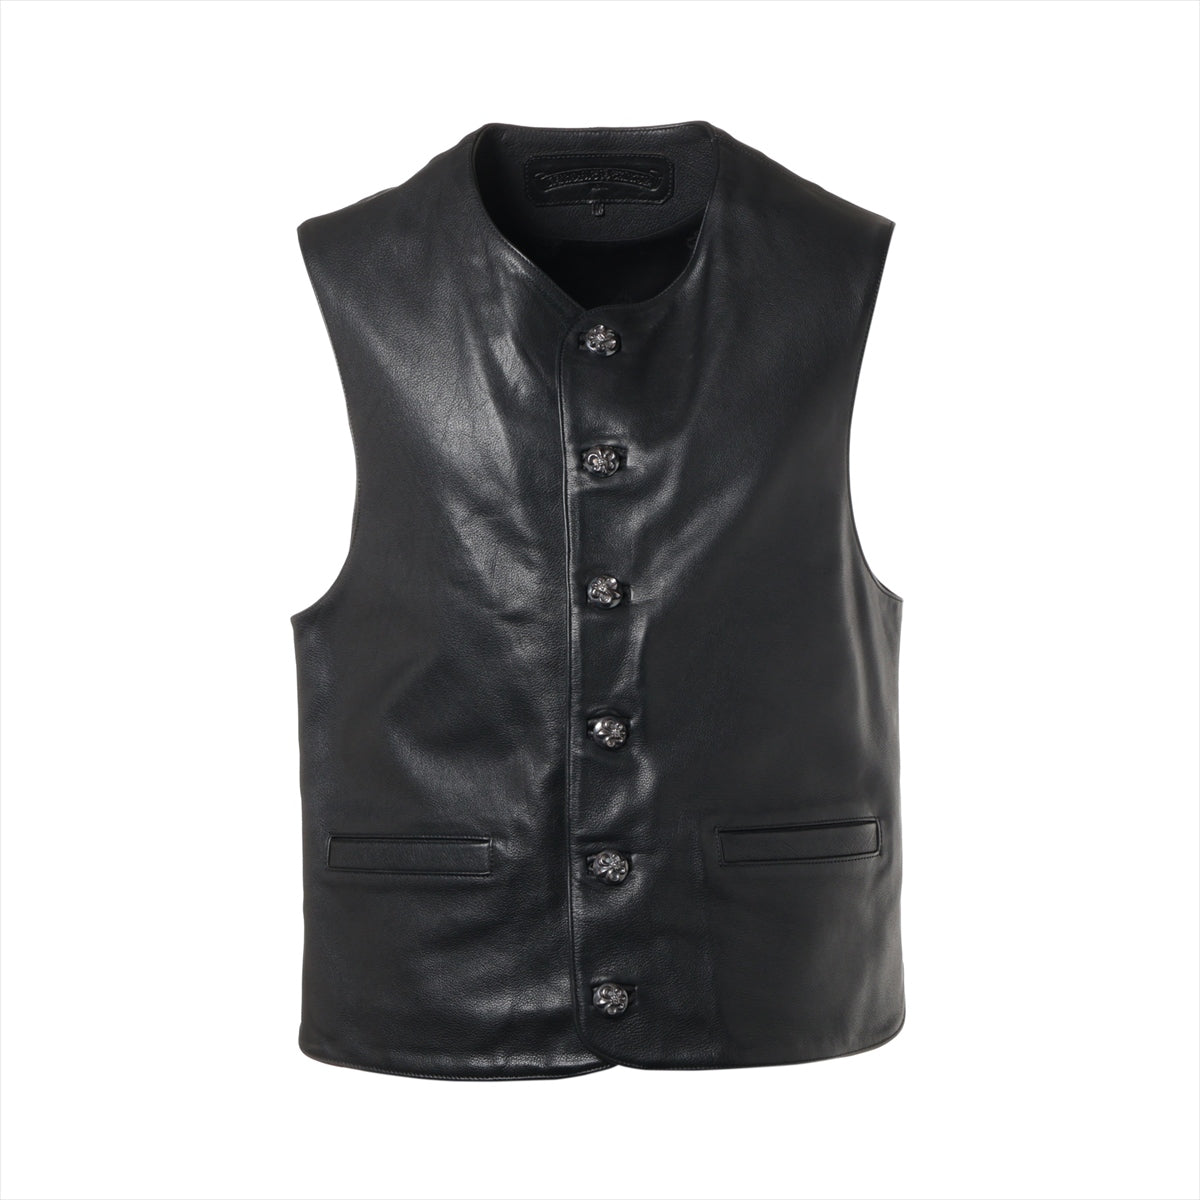 Chrome Hearts Vest Unknown material size M Black Leather BS flare button